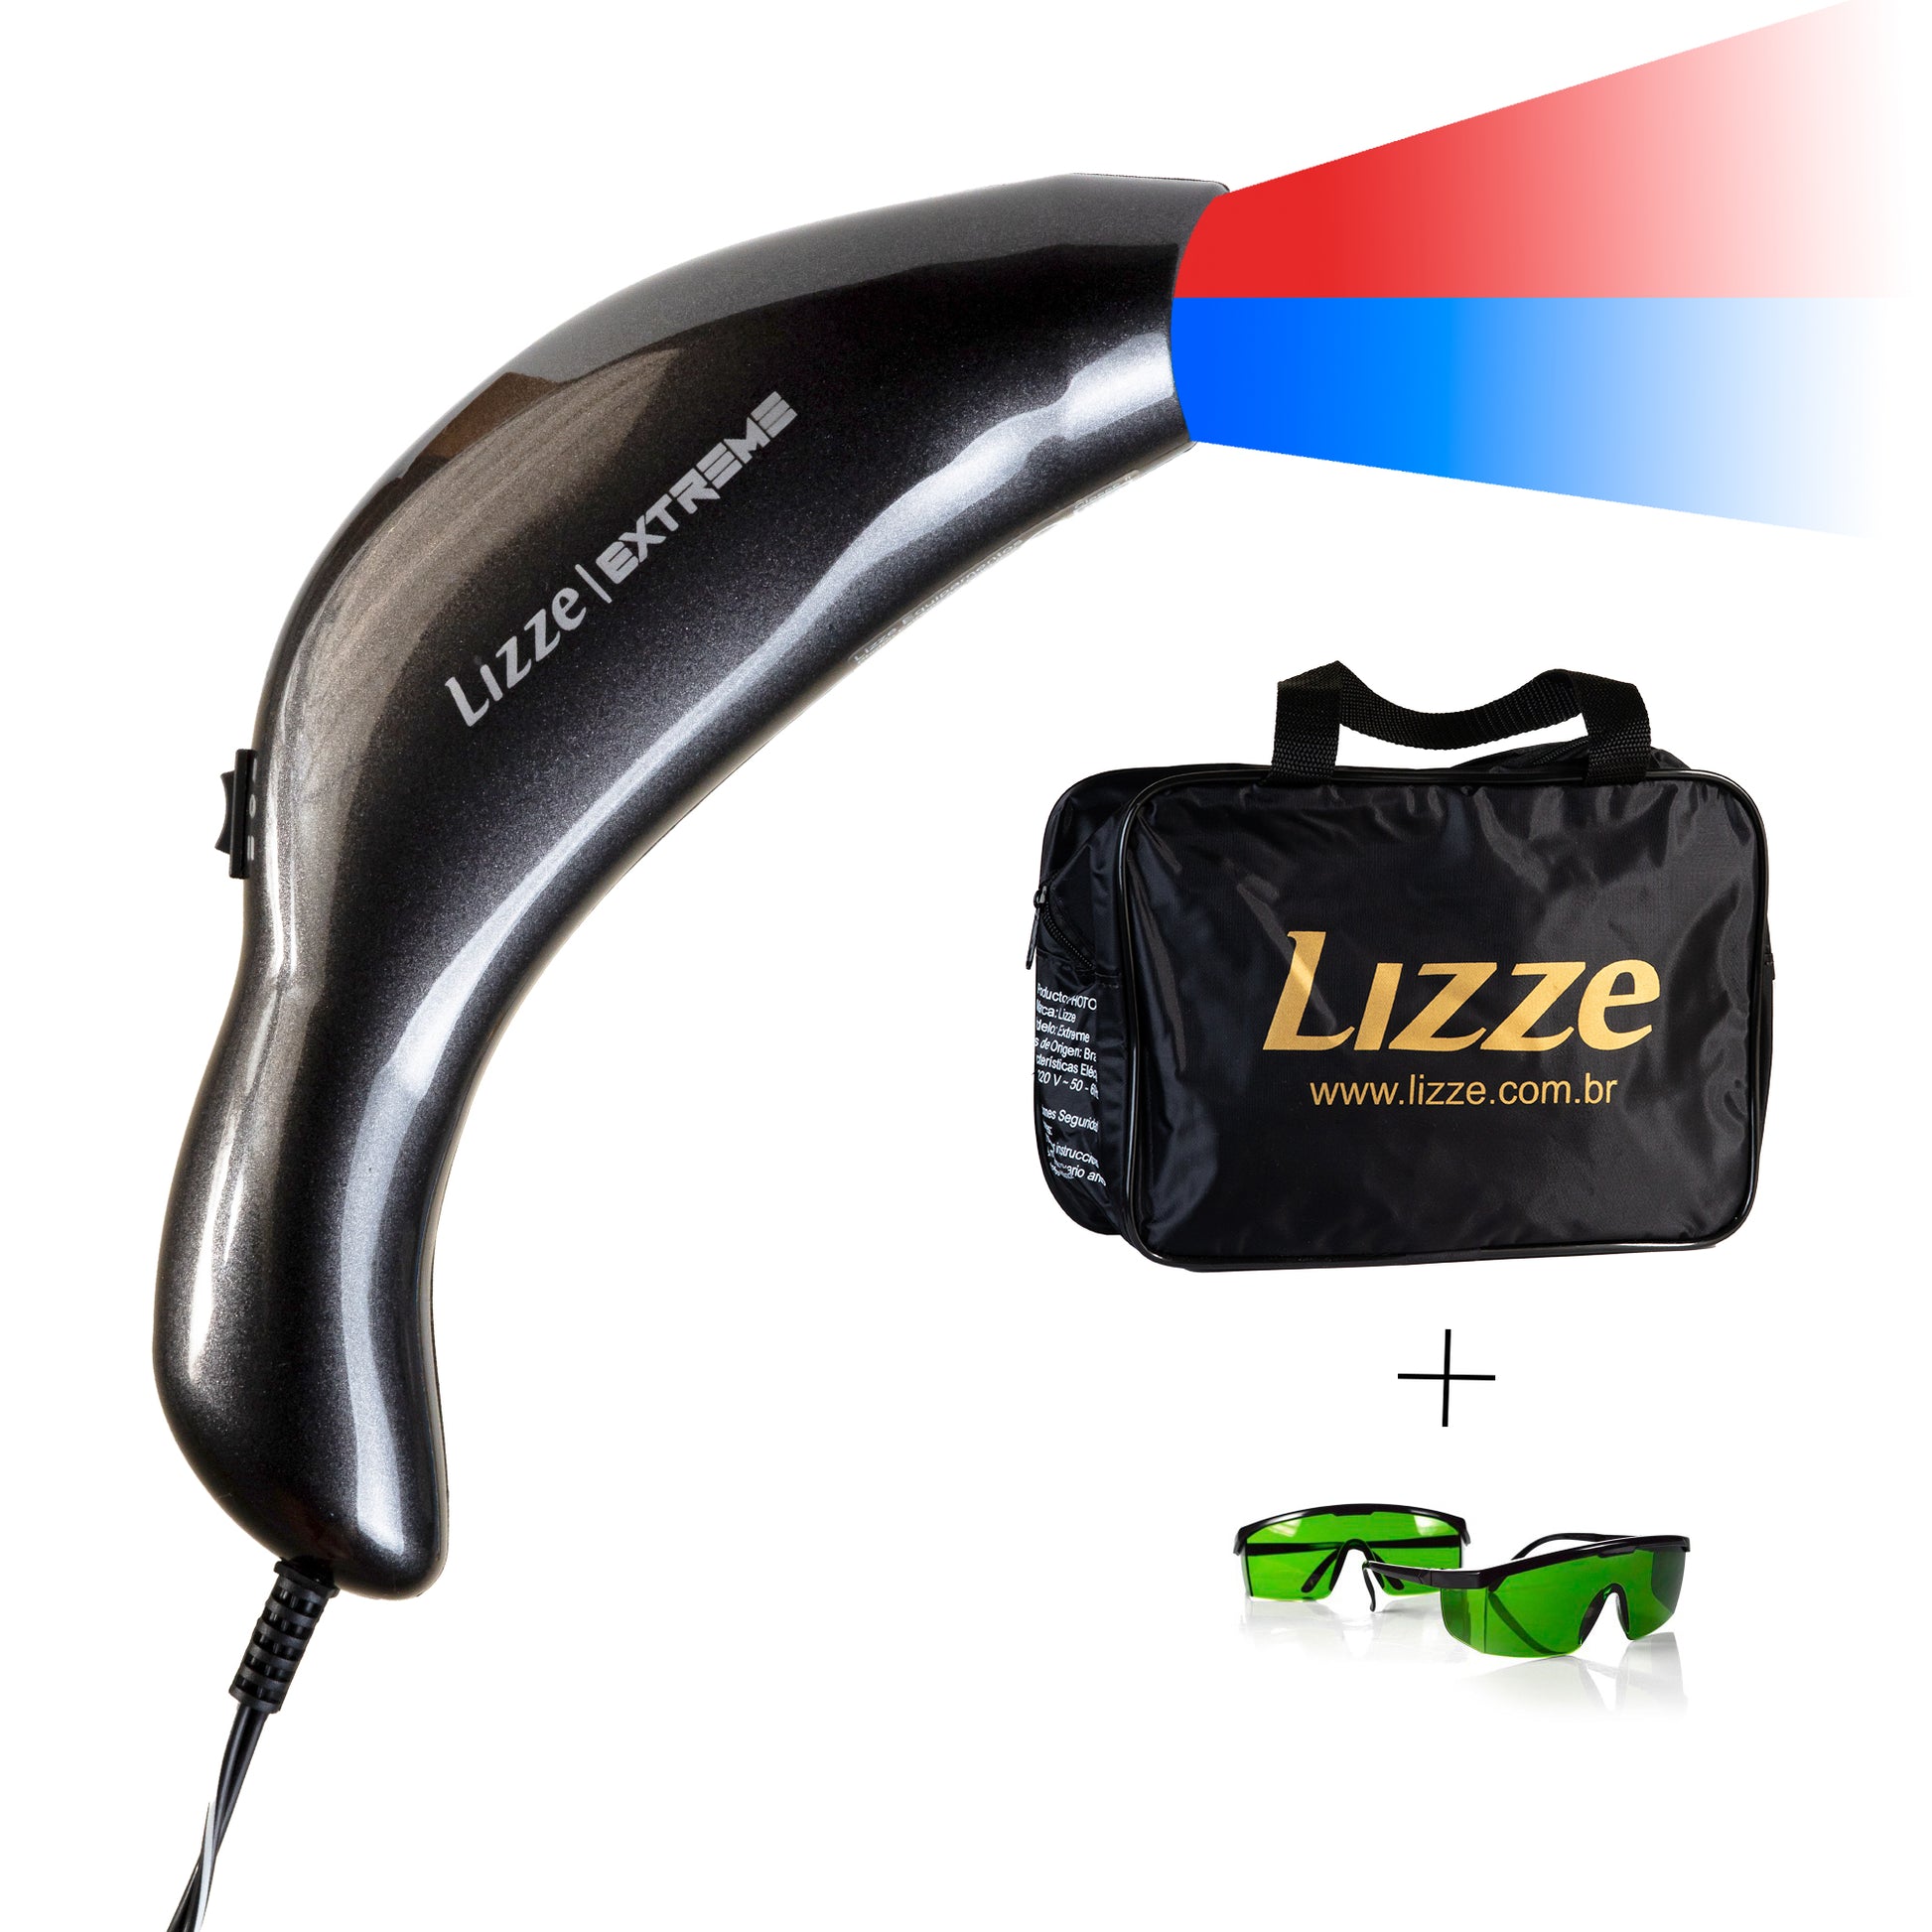 How to straighten hair without heat - Lizze Photon Extreme.